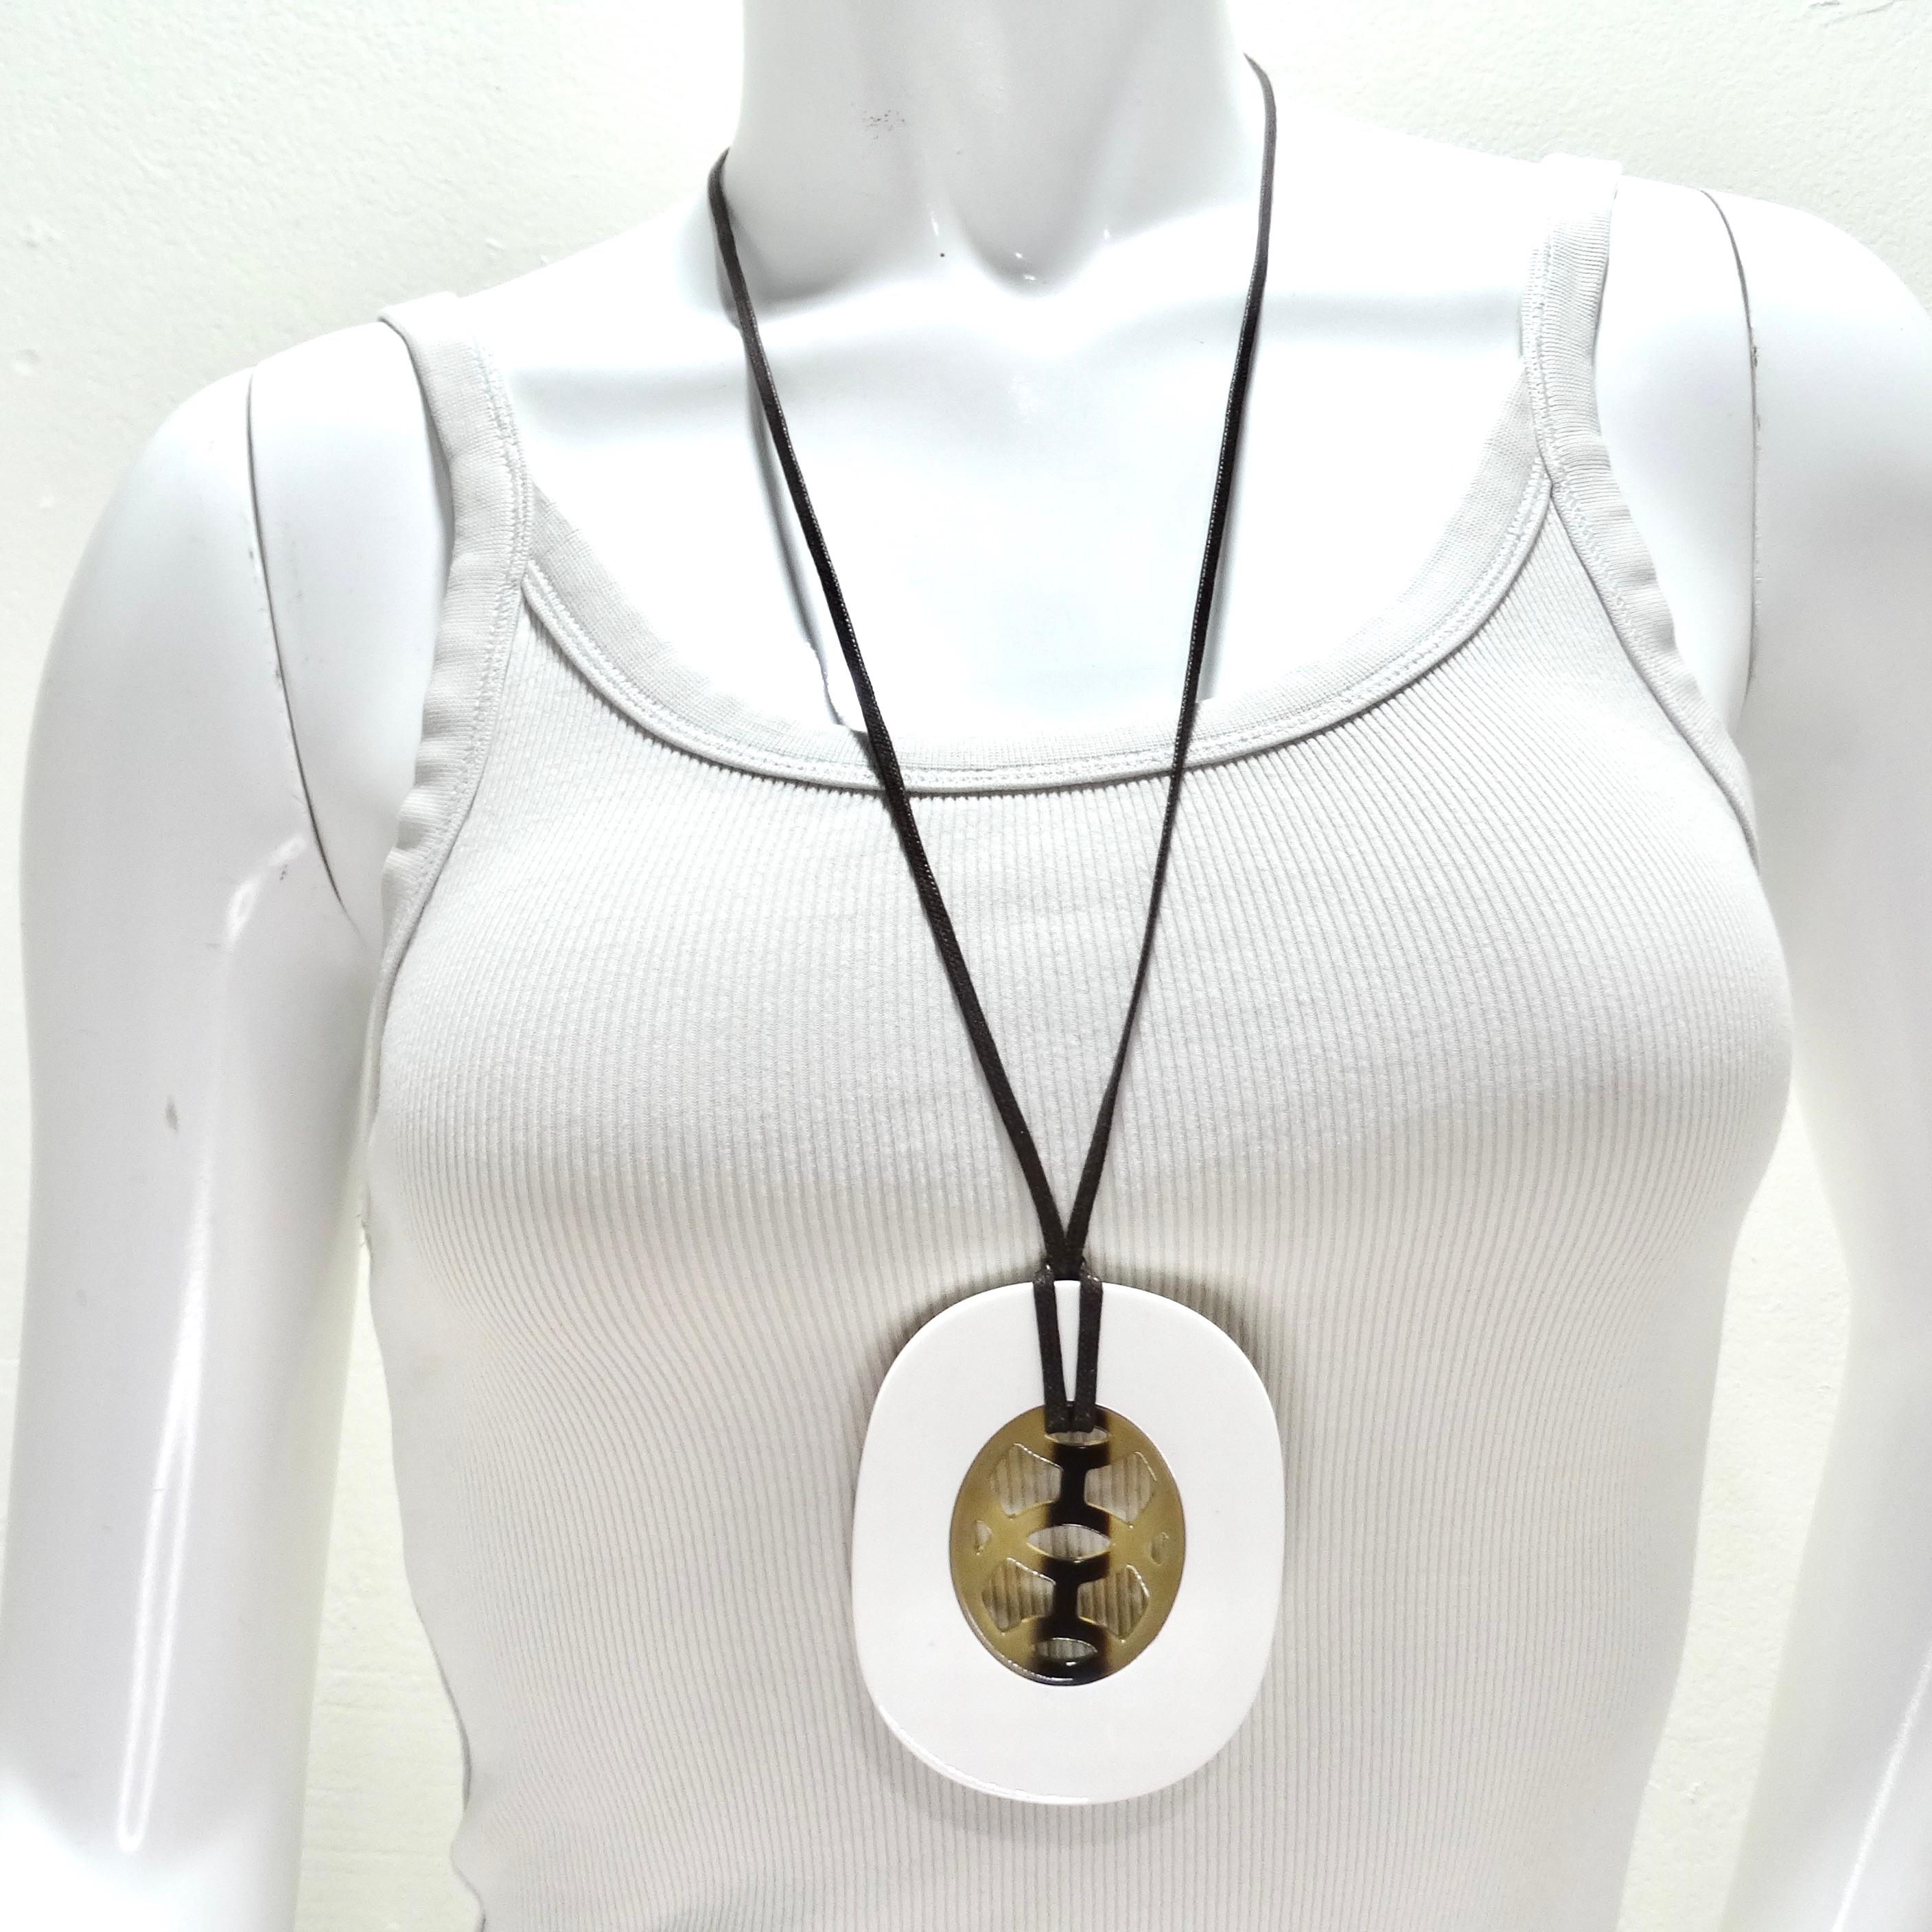 Do not miss out on the Hermes Buffalo Horn Lacquer Lift Necklace, a piece of art that combines the natural beauty of white buffalo horn and lacquered wood to create a unique and luxurious statement necklace. The pendant is a masterpiece of artistry,